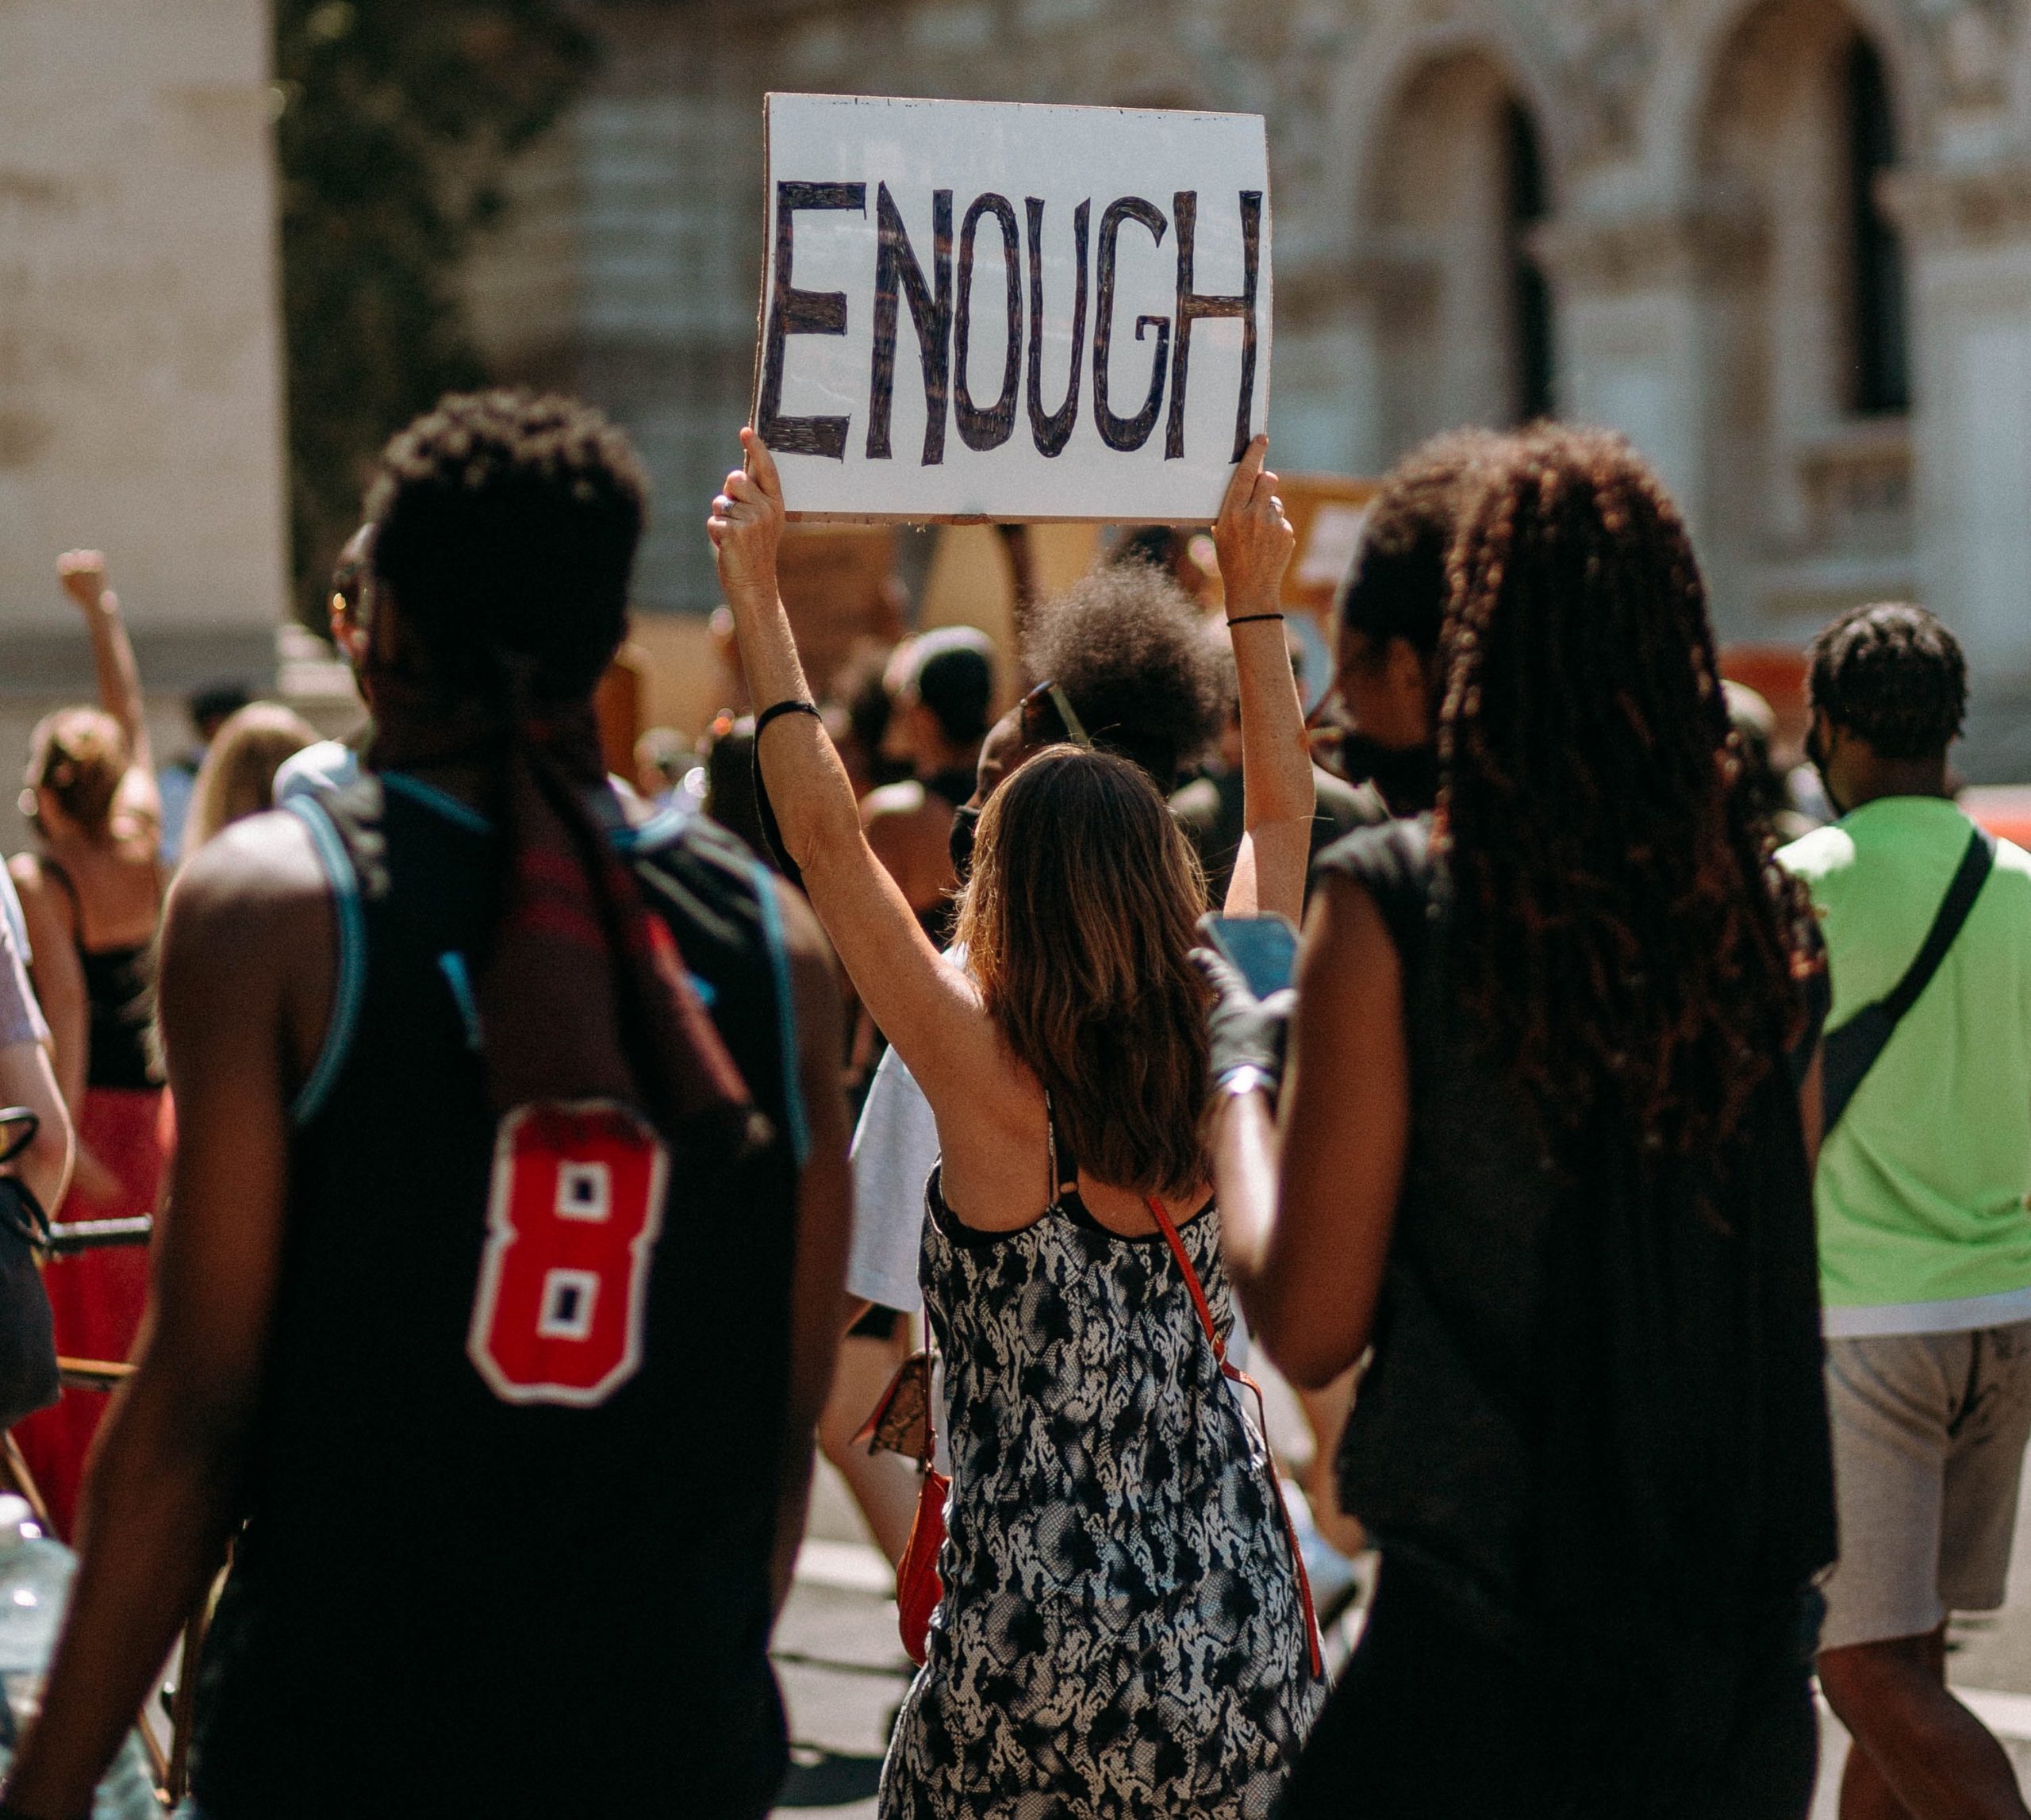 Activists walk with a sign that says "Enough"